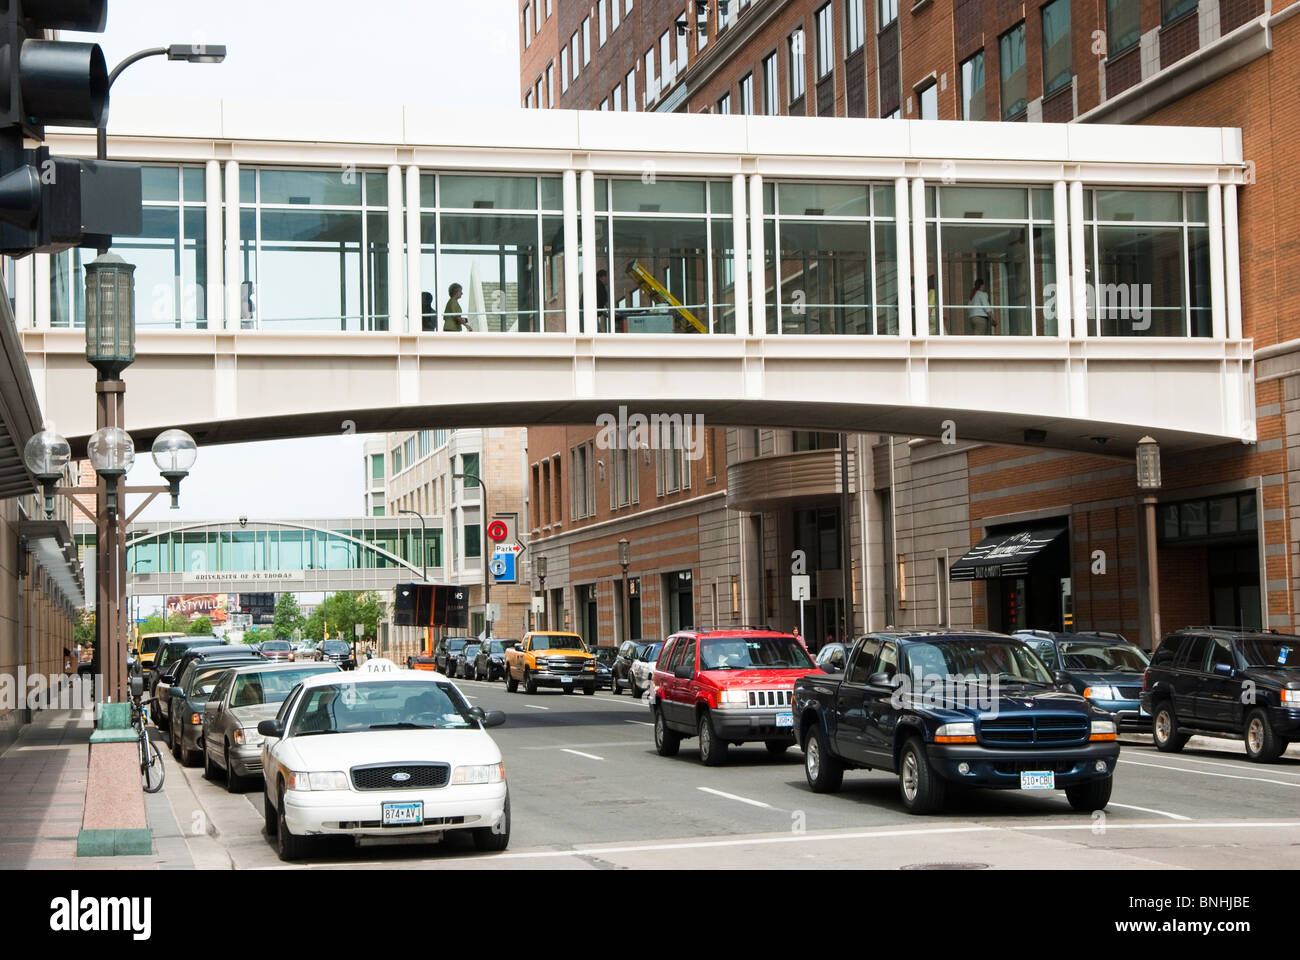 Pedestrians walk through the skyway system elevated above street level in downtown Minneapolis. Stock Photo